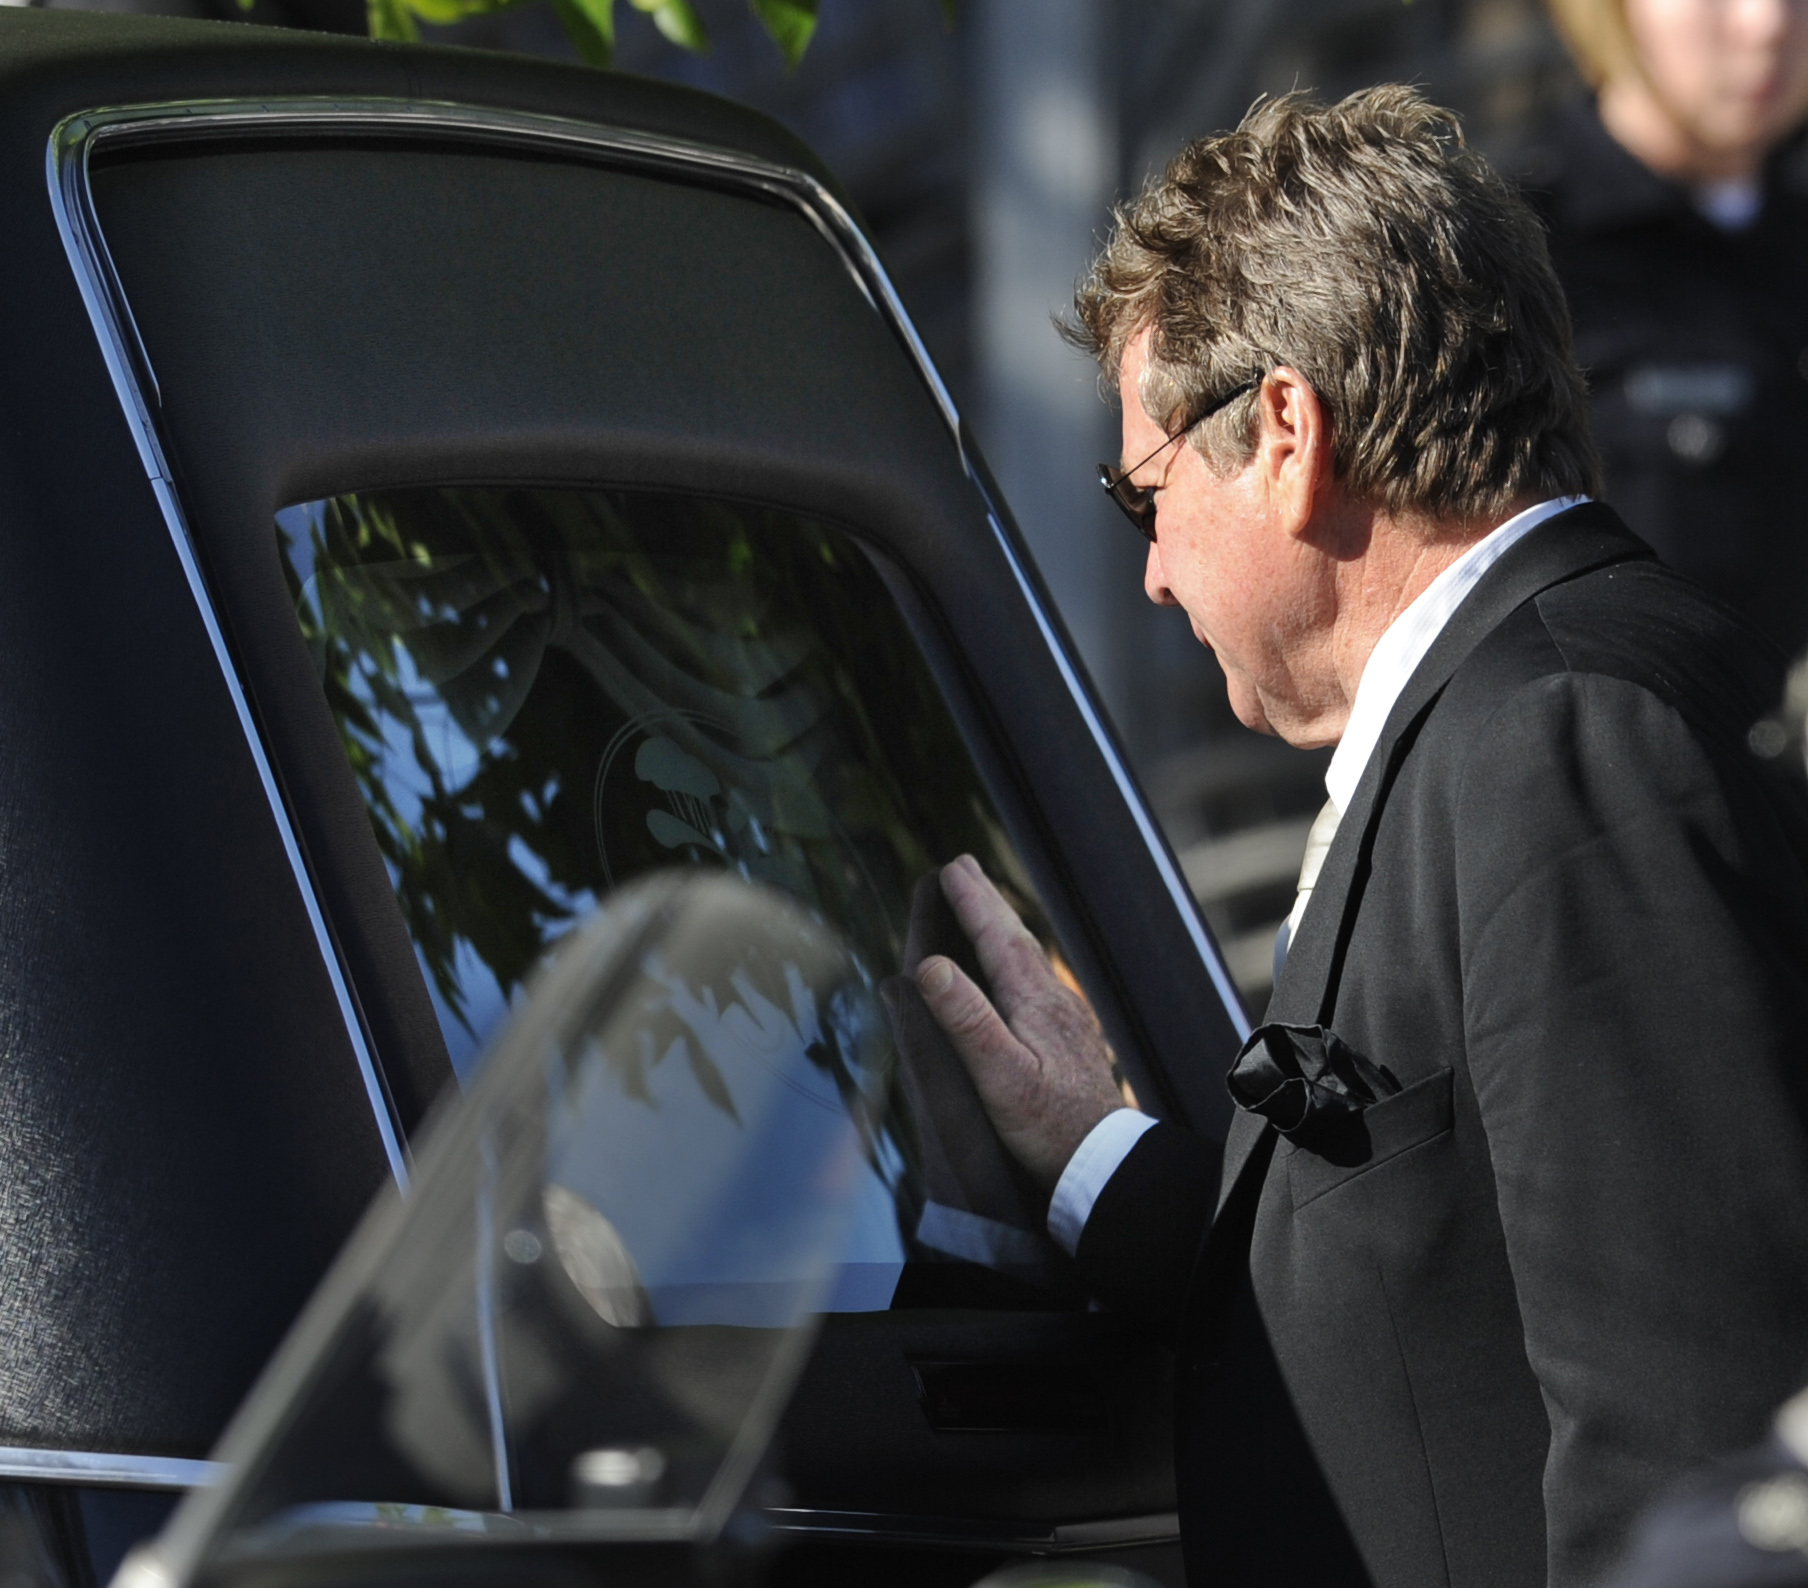 Ryan O’Neal touches the back of the hearse carrying Farrah Fawcett’s casket after her...